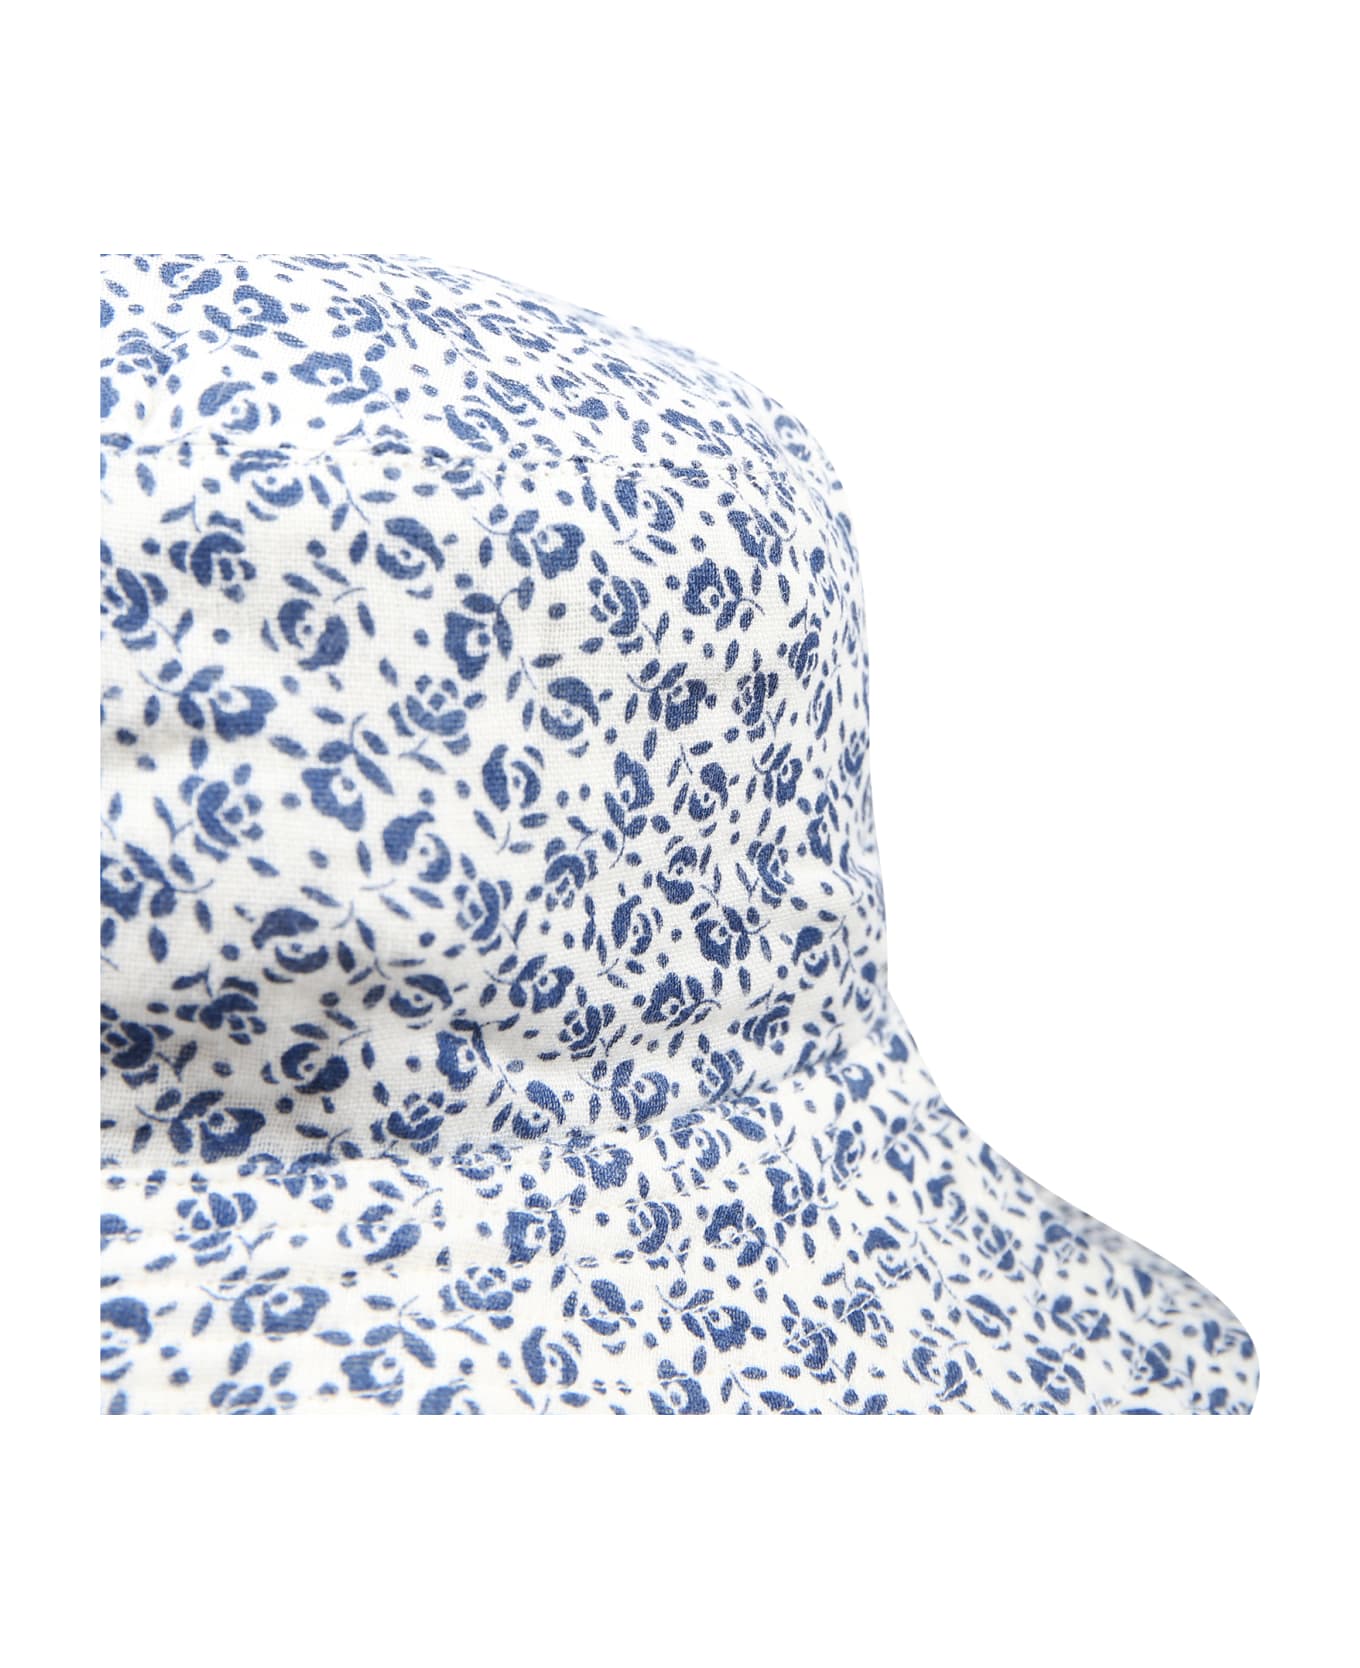 Petit Bateau White Cloche For Girl With Flowers - White